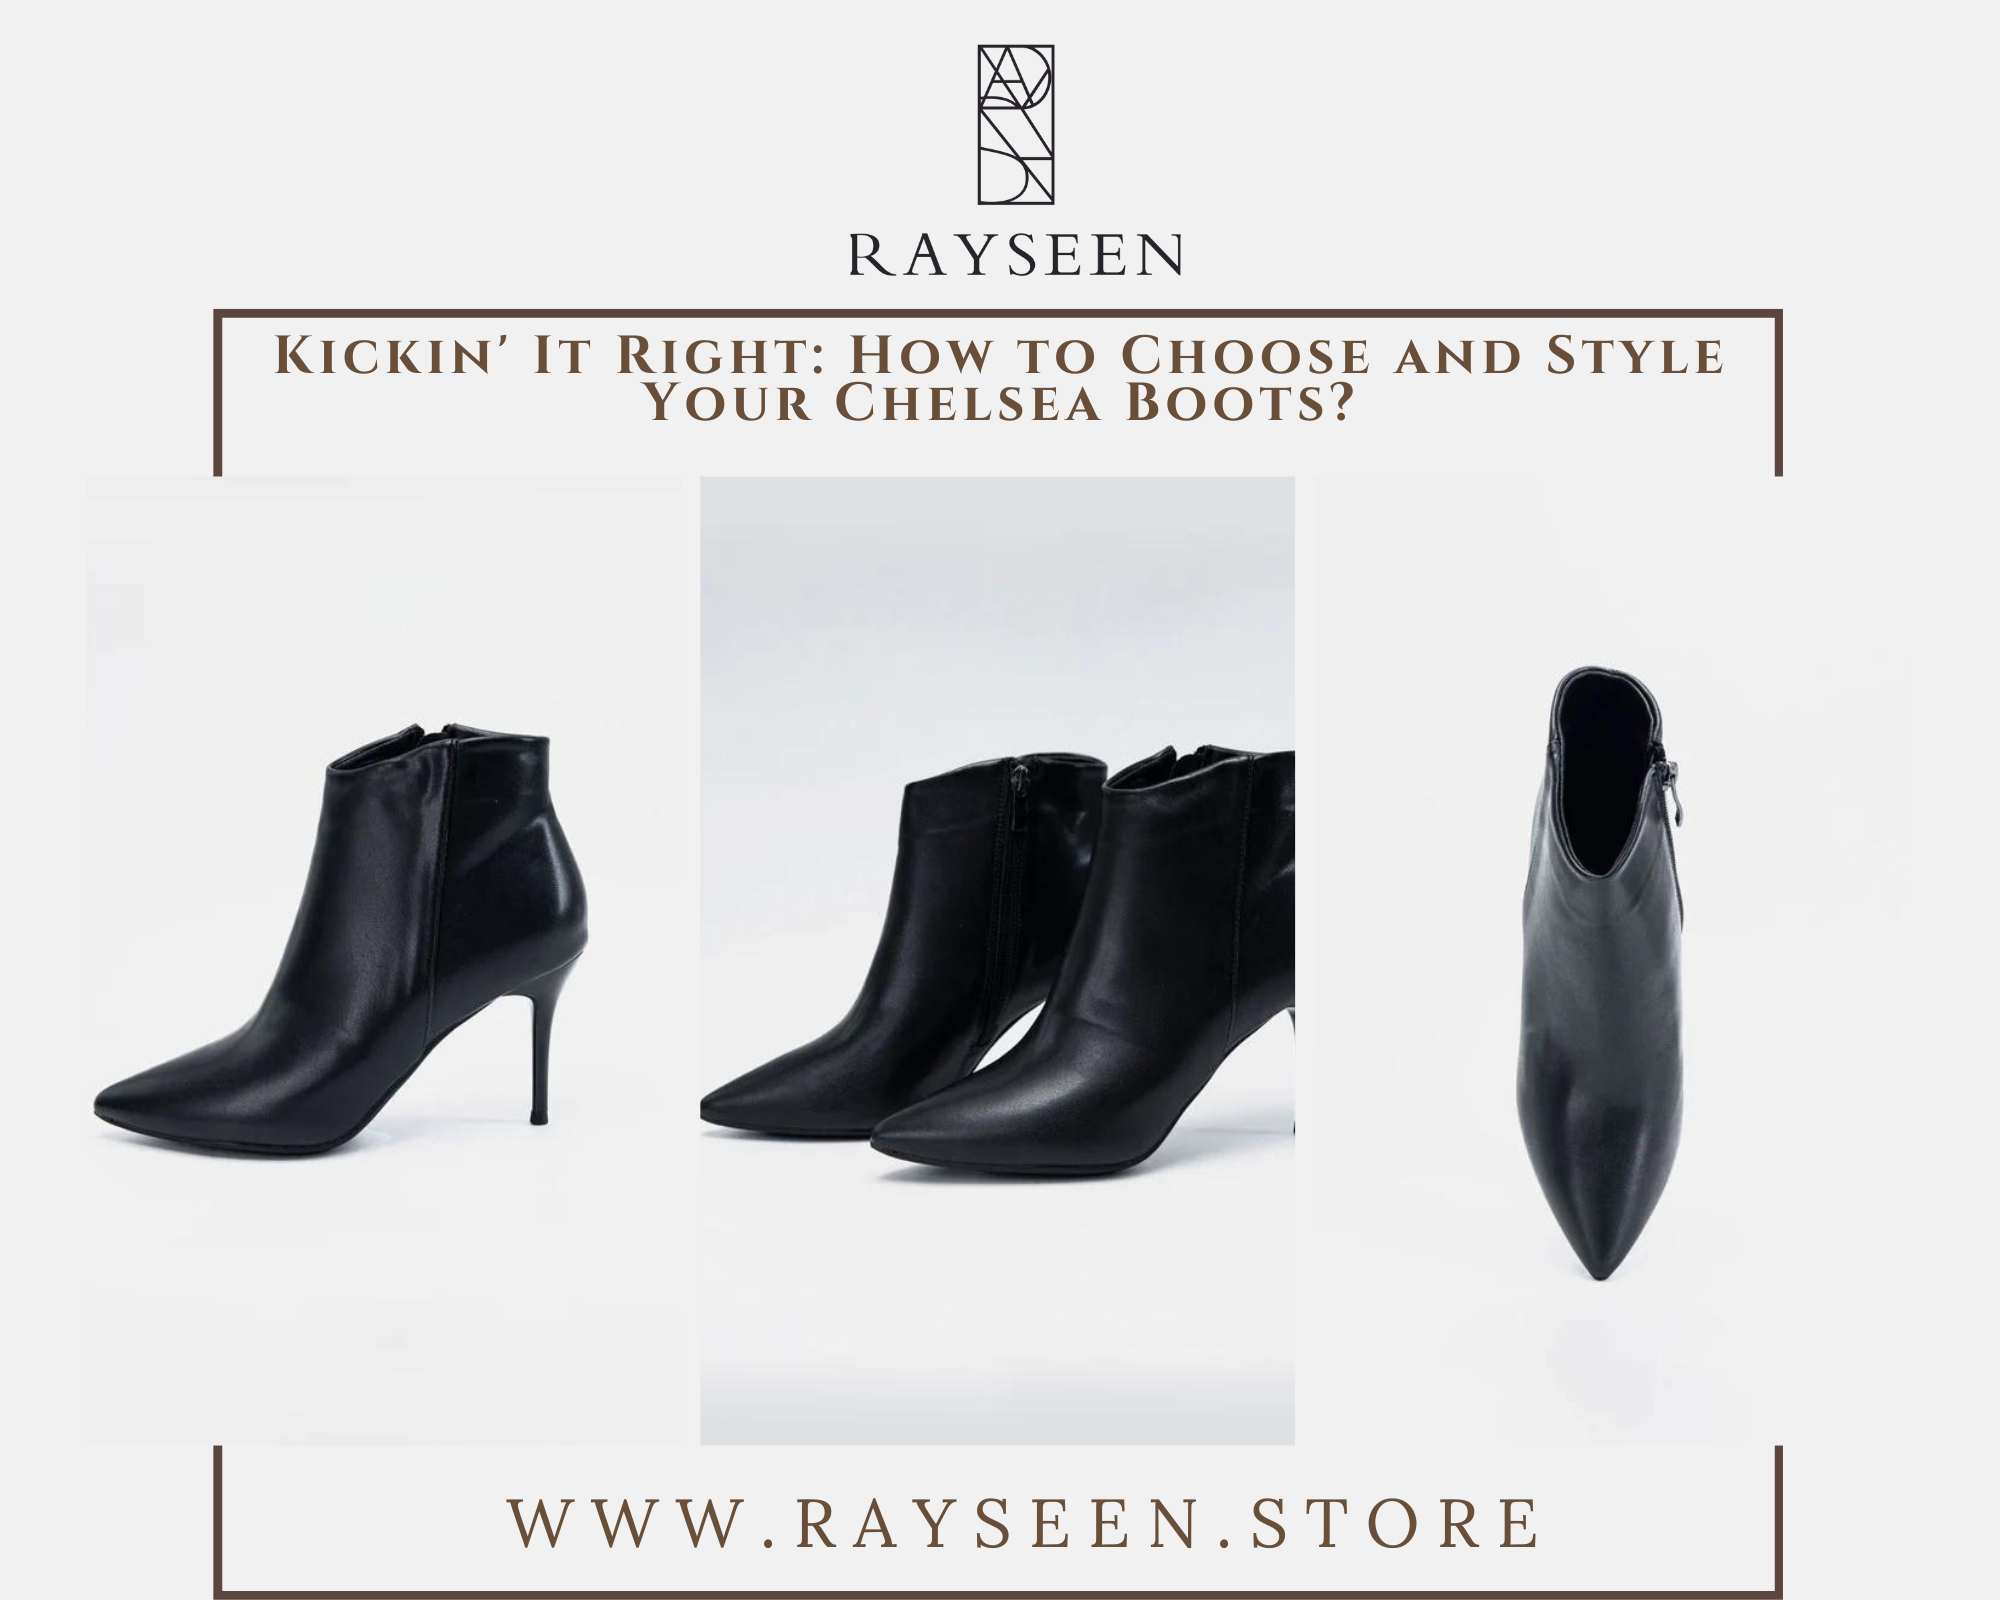 Kickin' It Right How to Choose and Style Your Chelsea Boots